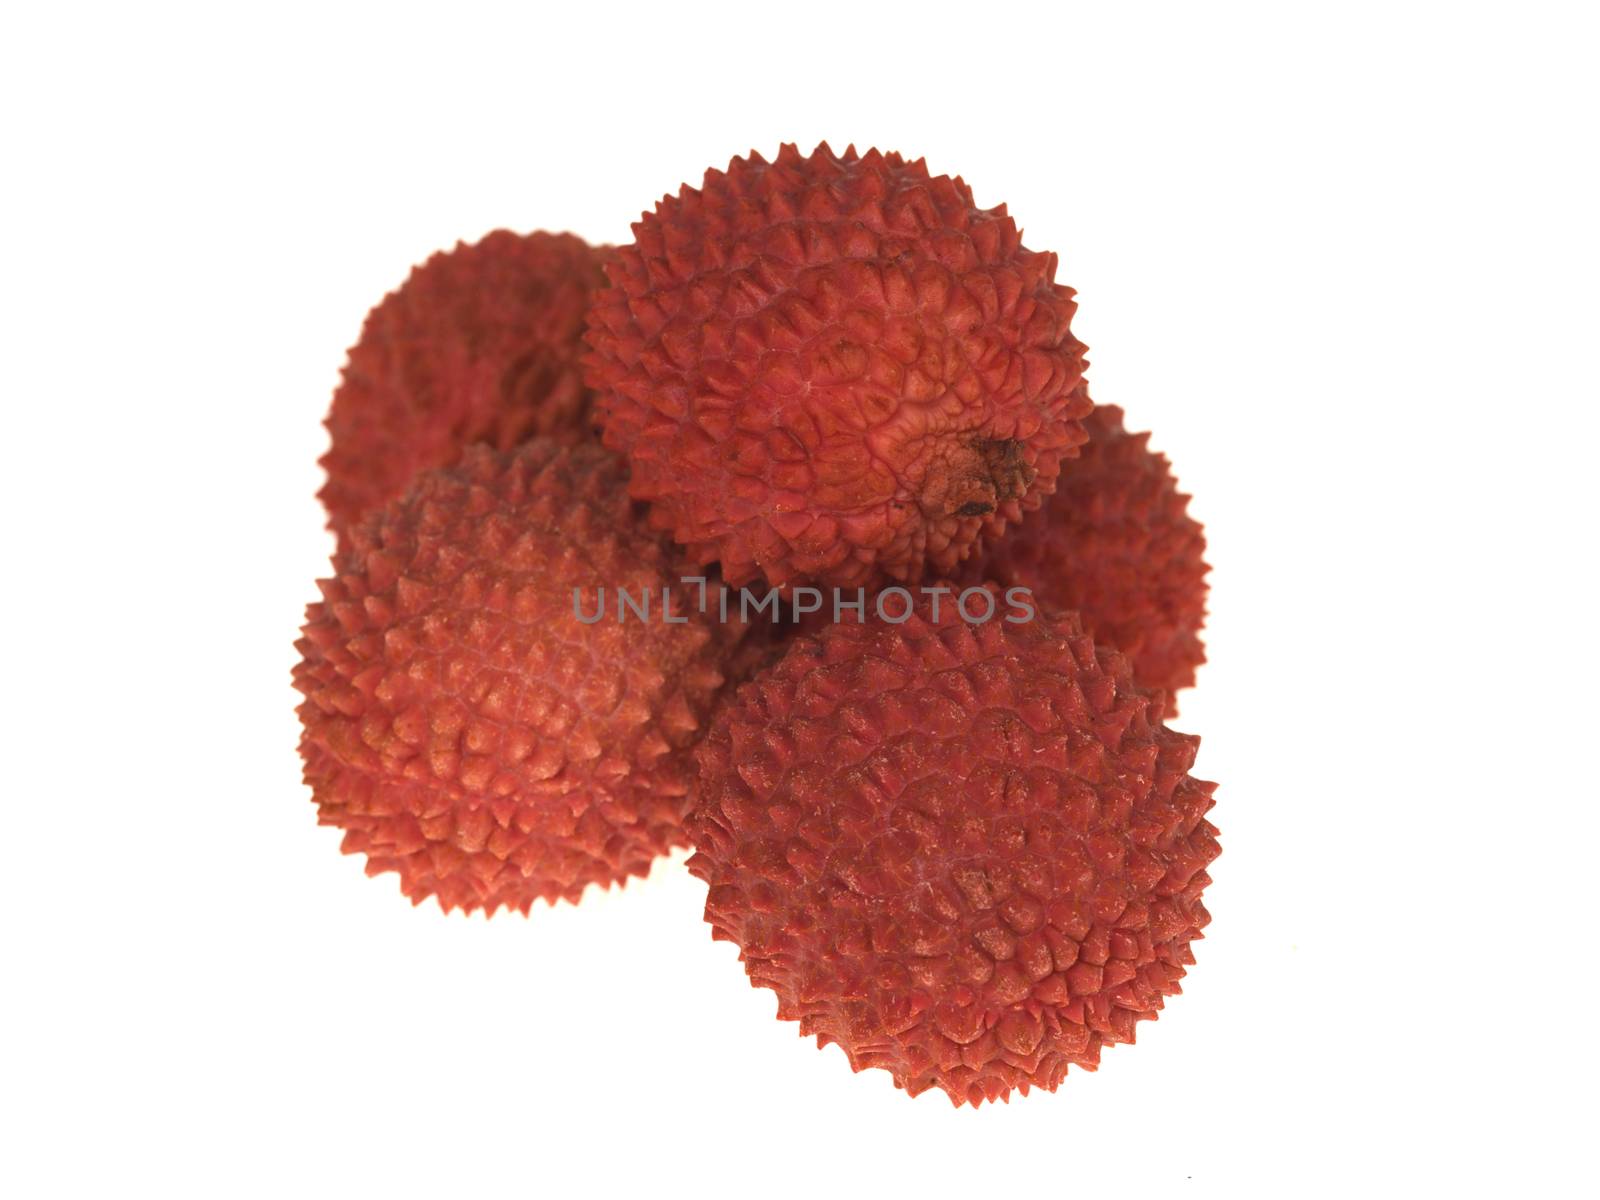 Lychees by Whiteboxmedia